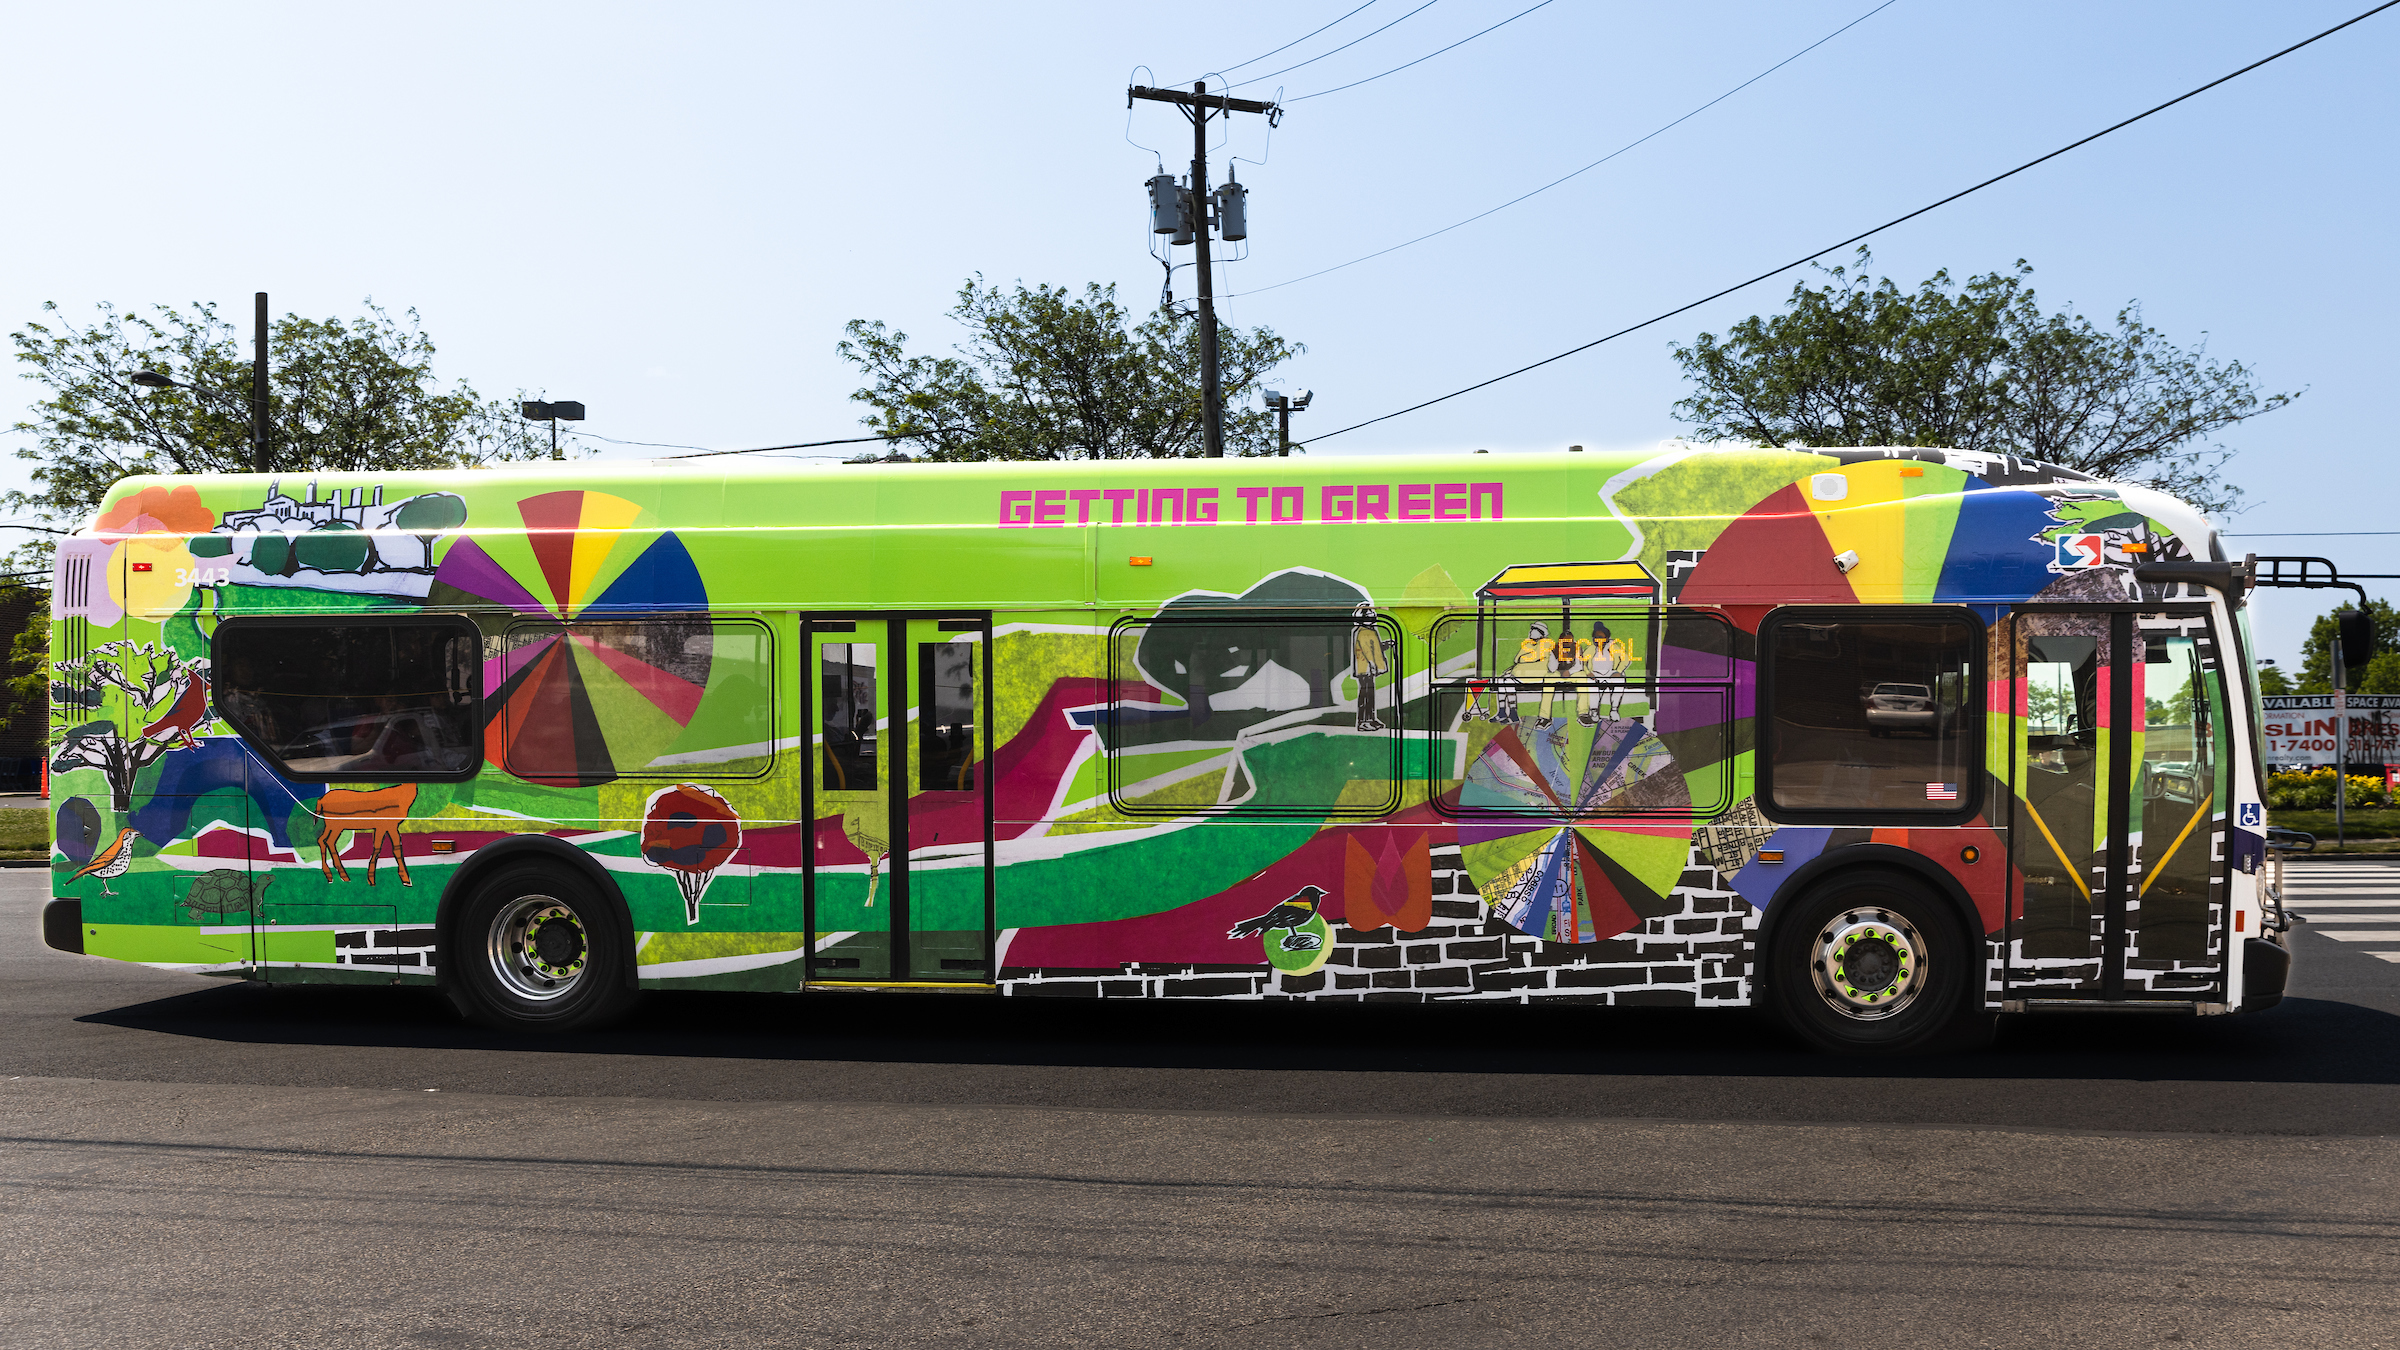 Bus with Getting to Green artwork wrap.